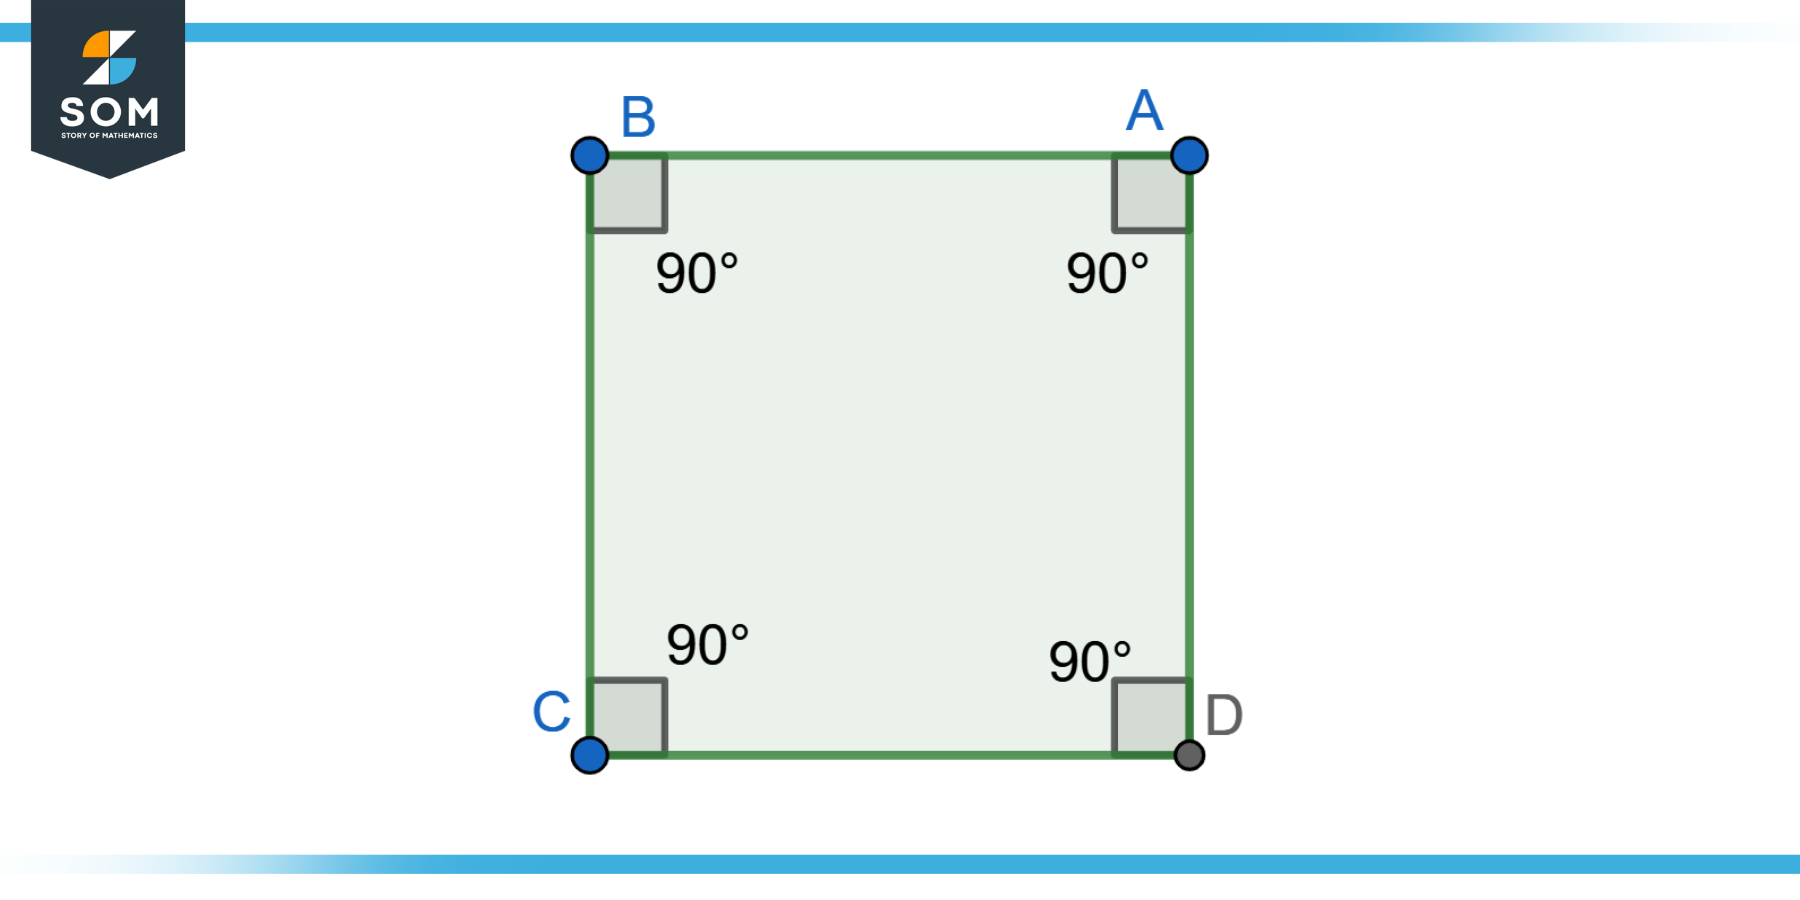 Graphical representation of the square ABCD